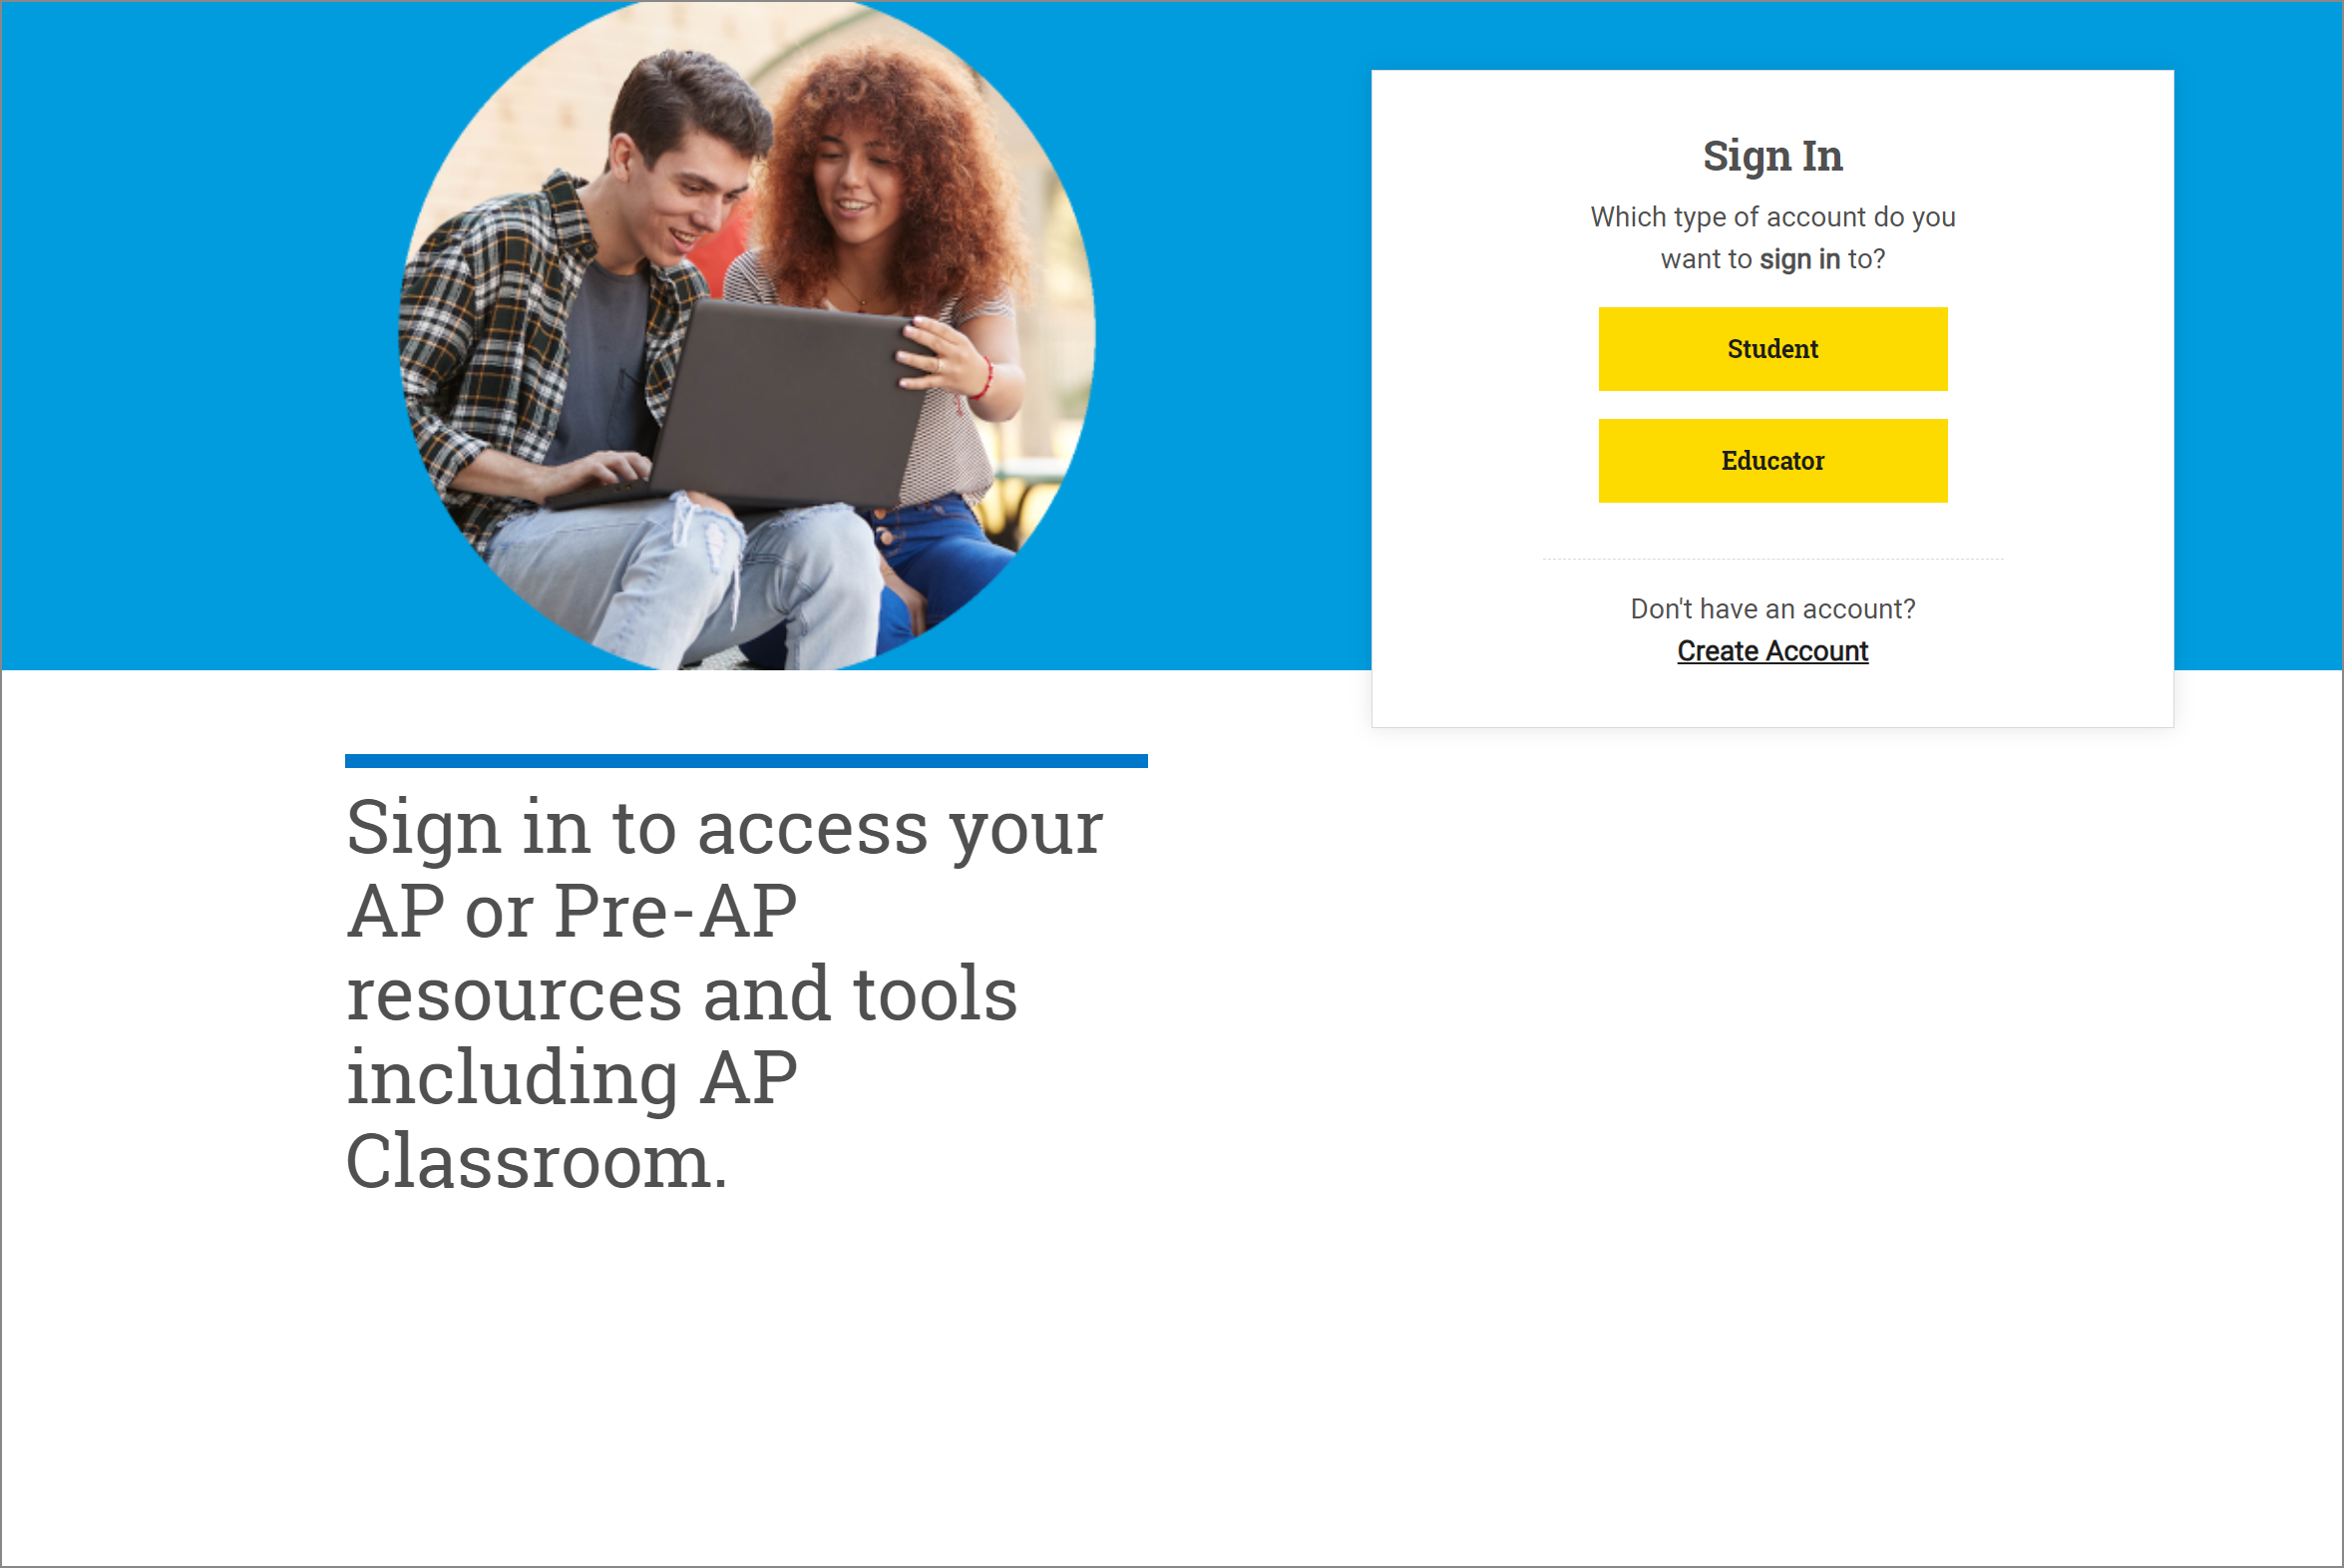 Sign-in screen for AP Classroom